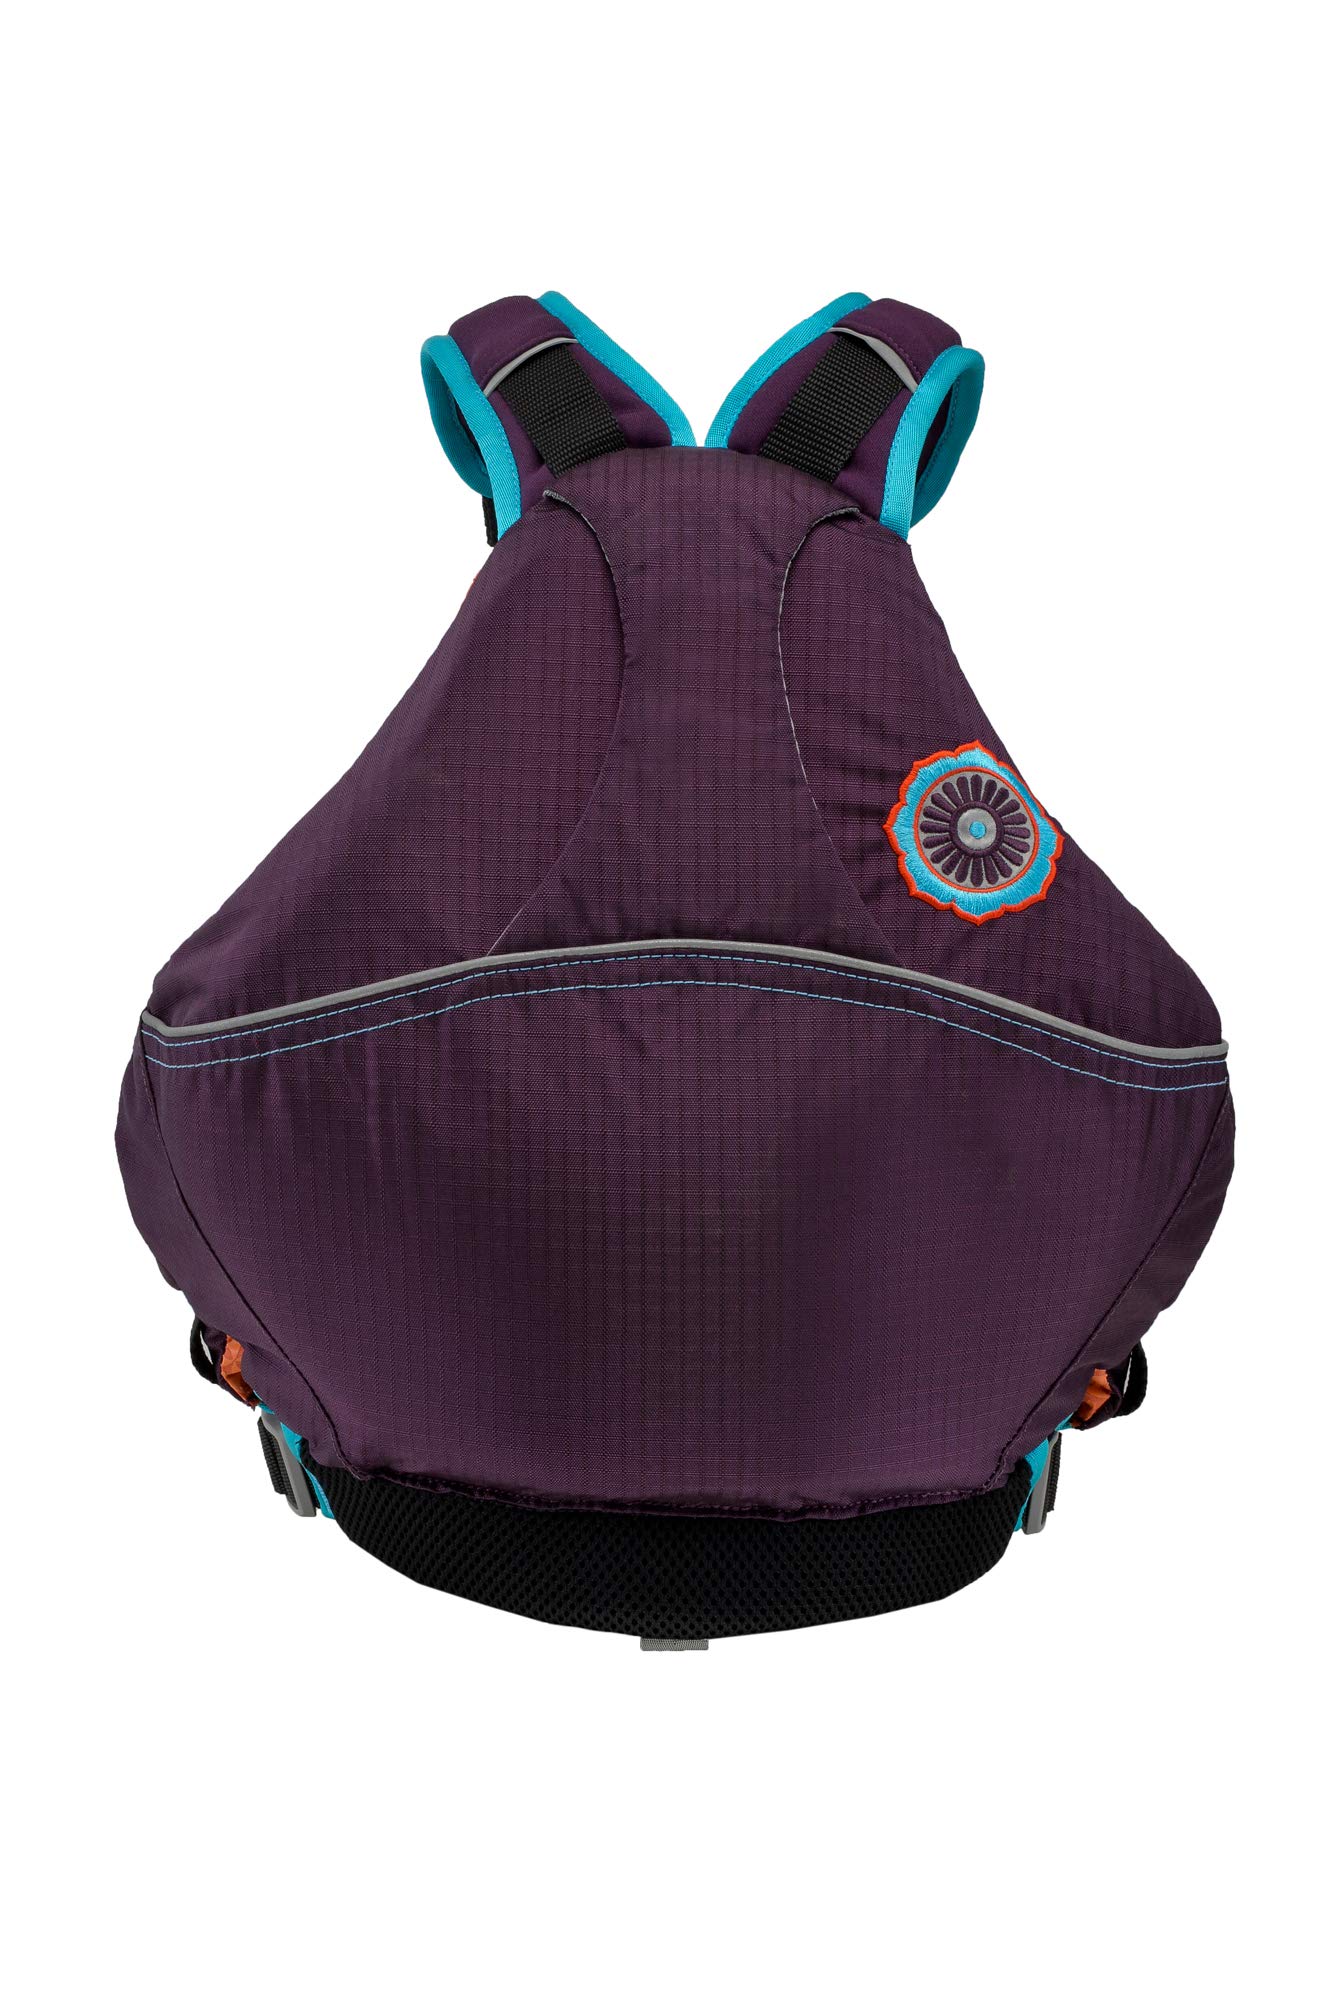 Astral Kids Otter 2.0 Life Jacket PFD for Whitewater, Sailing, and Stand Up Paddle Boarding